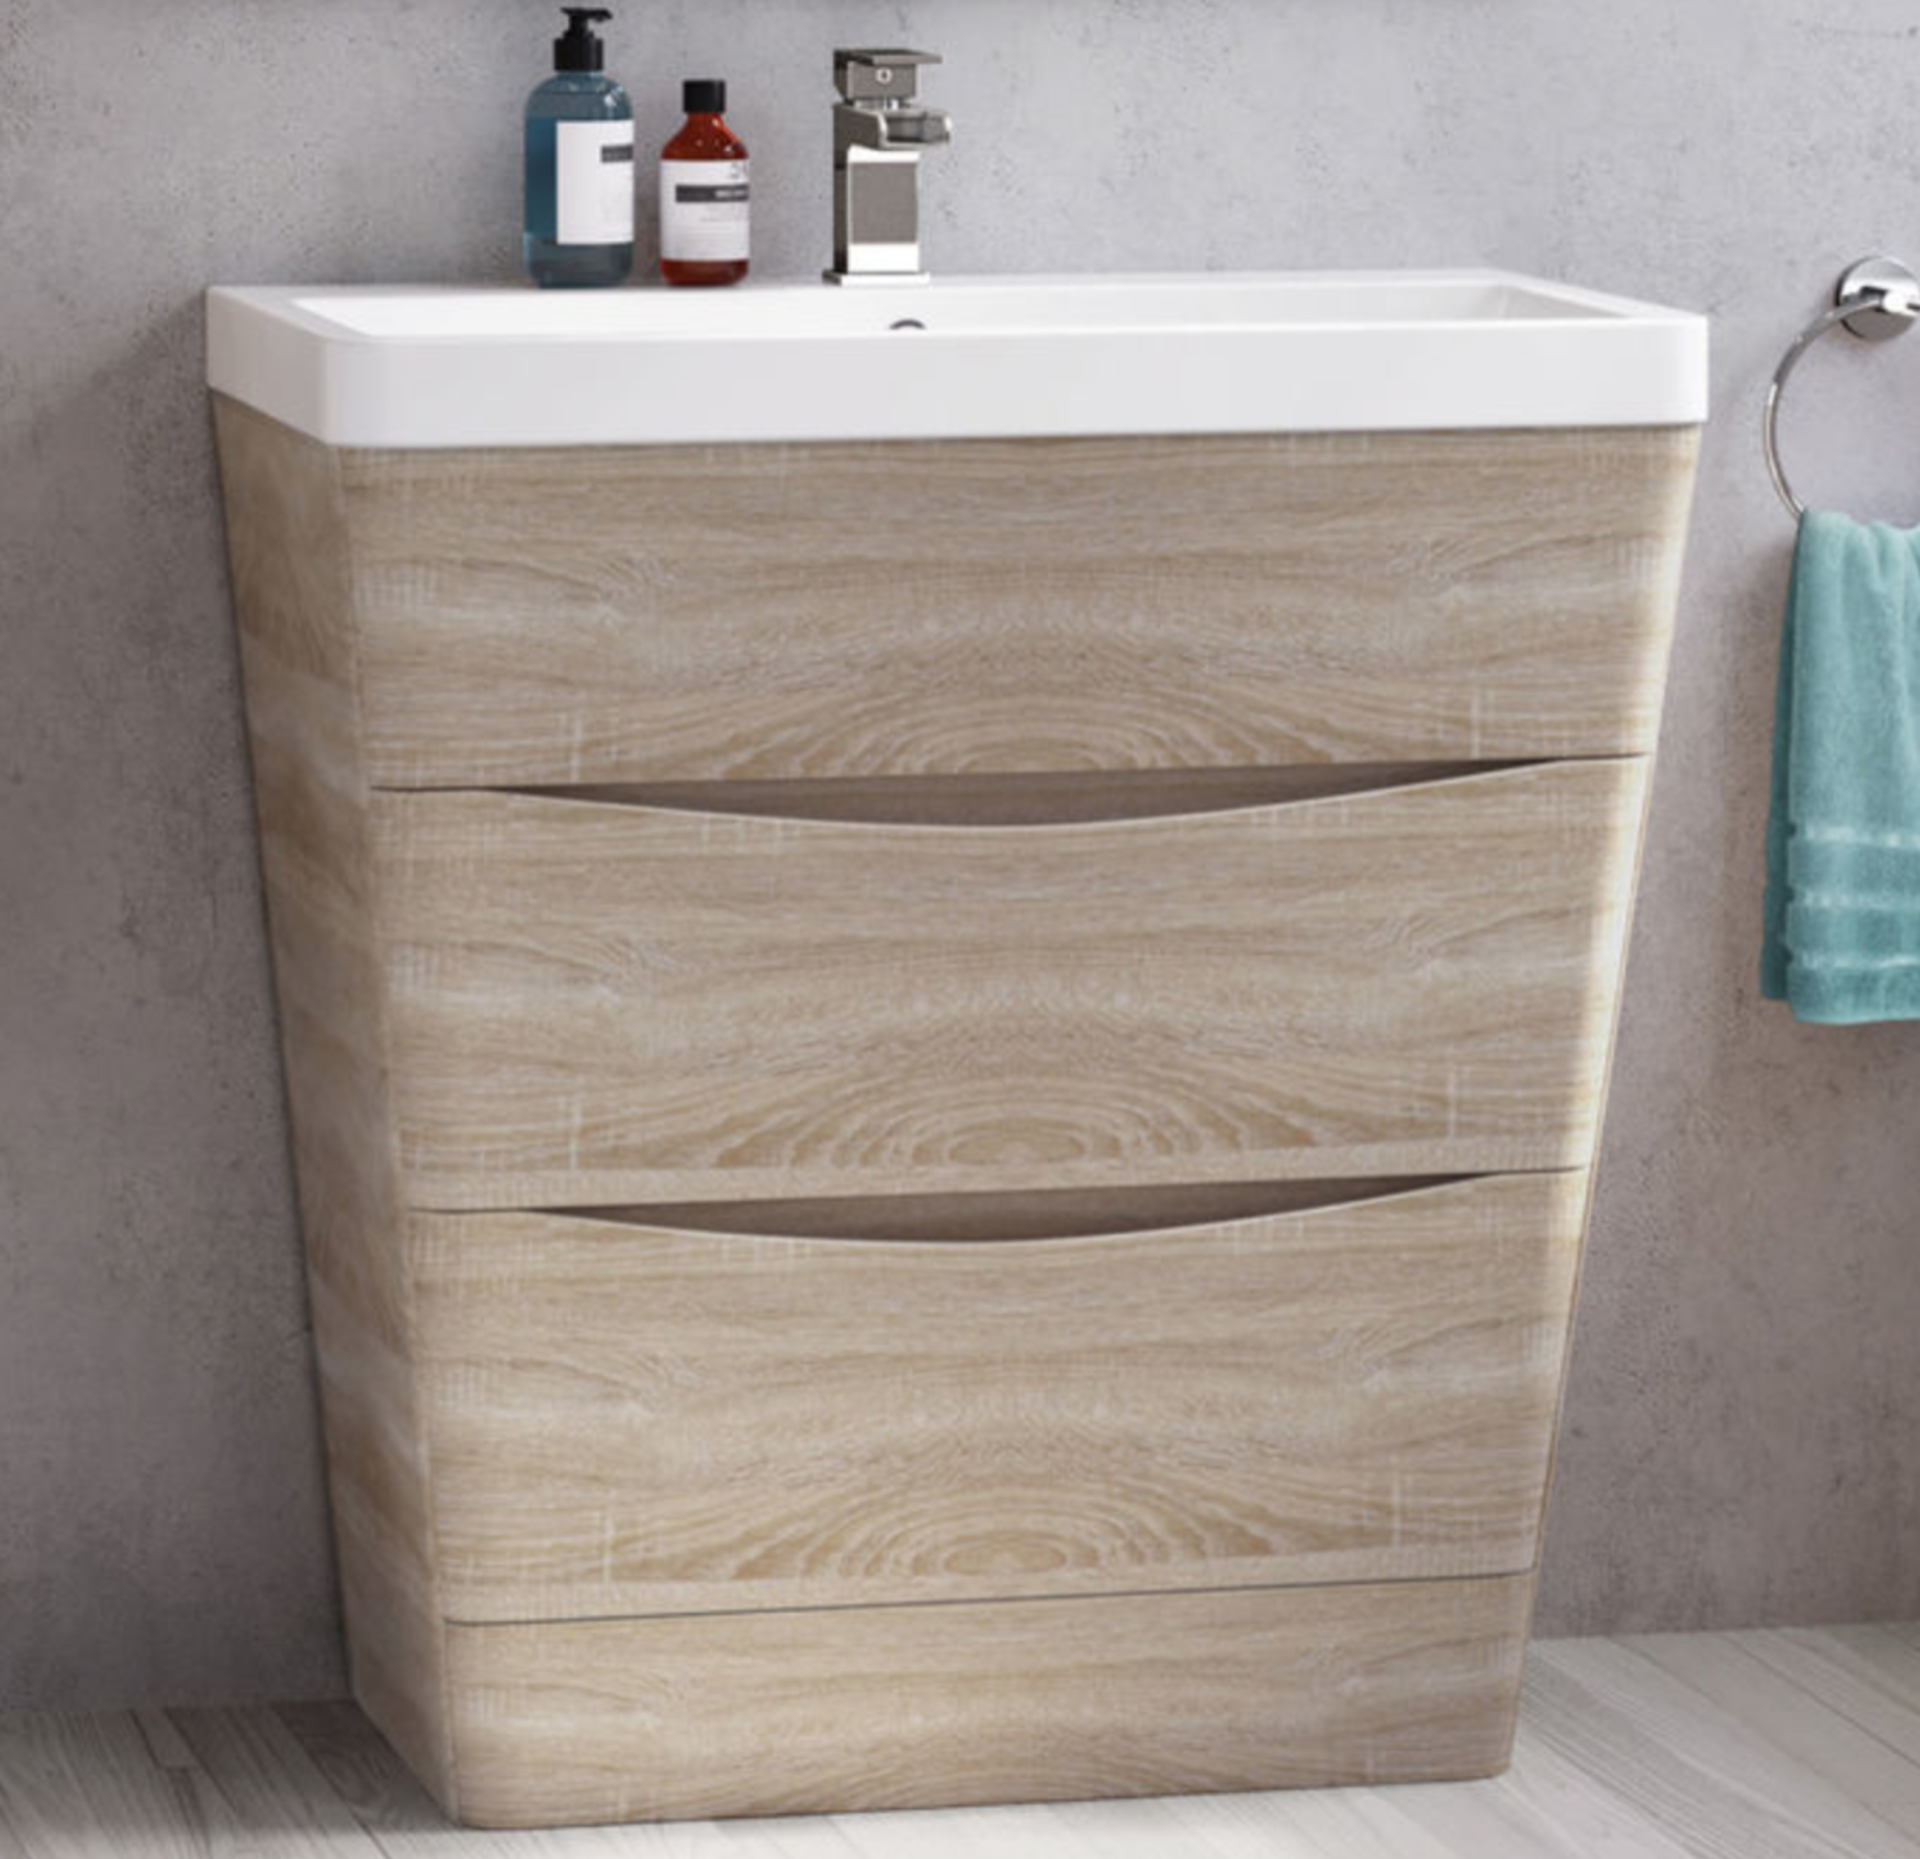 New & Boxed 800mm Austin Ii Light Oak Effect Built In Sink Drawer Unit - Wall Hung. Rrp £849.... - Image 3 of 4